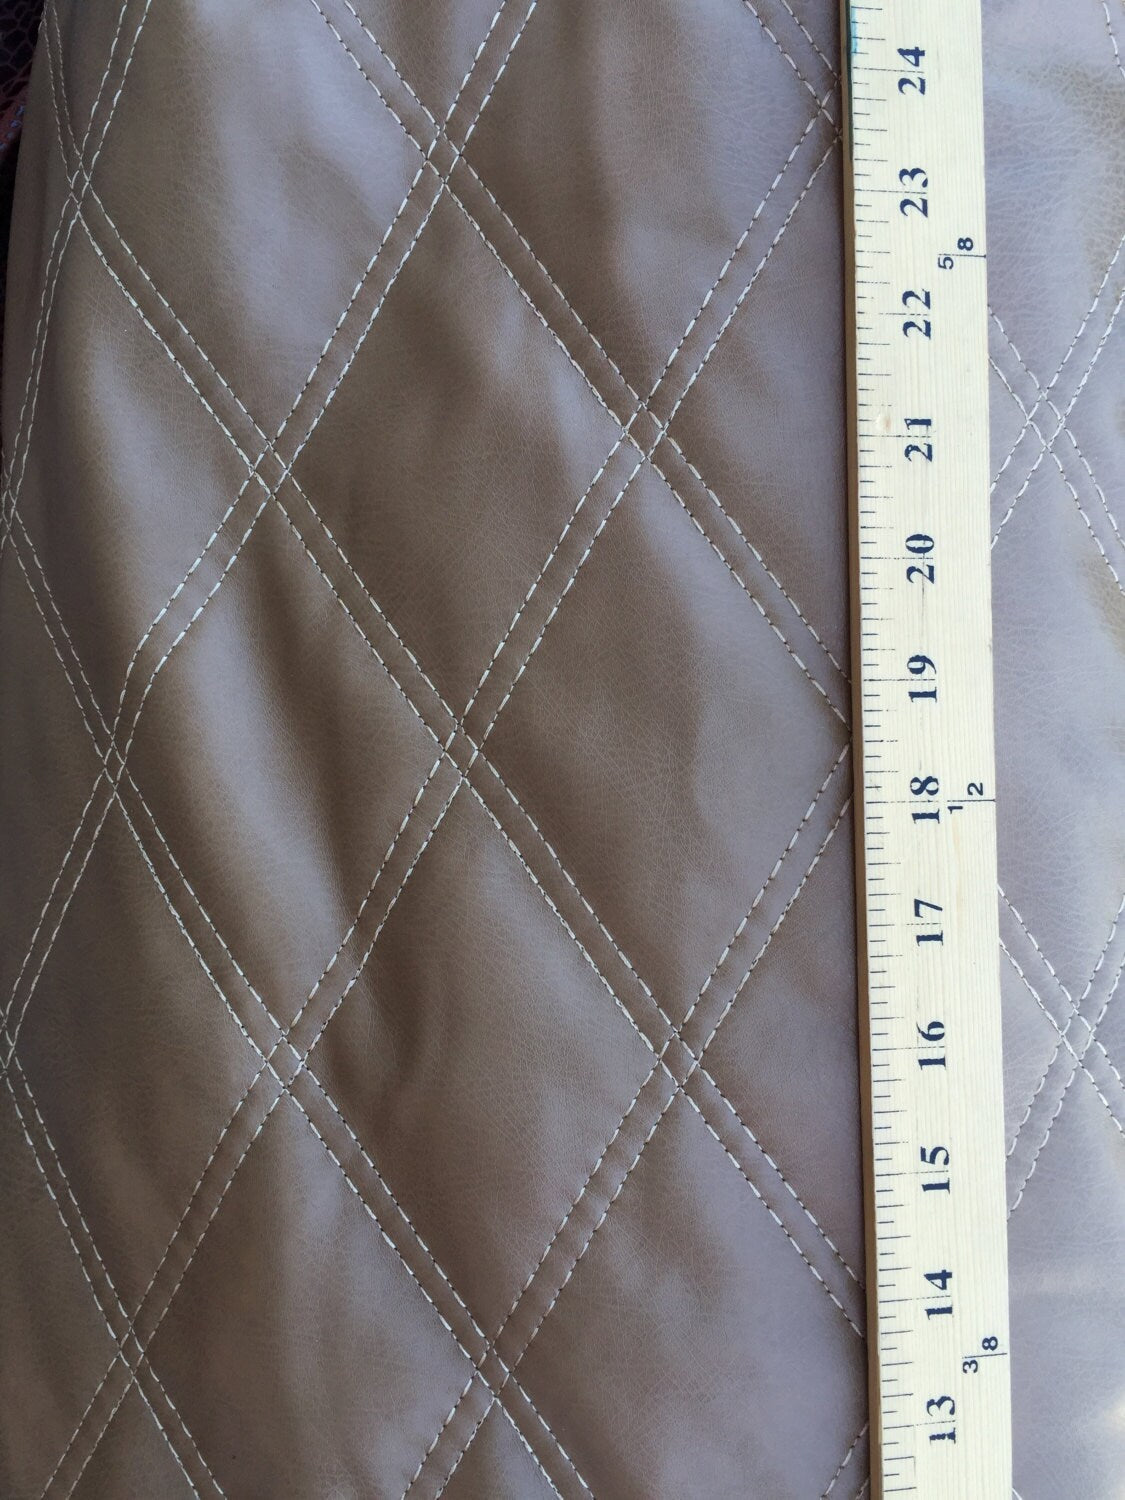 Brown vinyl Bentley upholstery  Cotton backing. Fabric sold by the yard 58 inch w